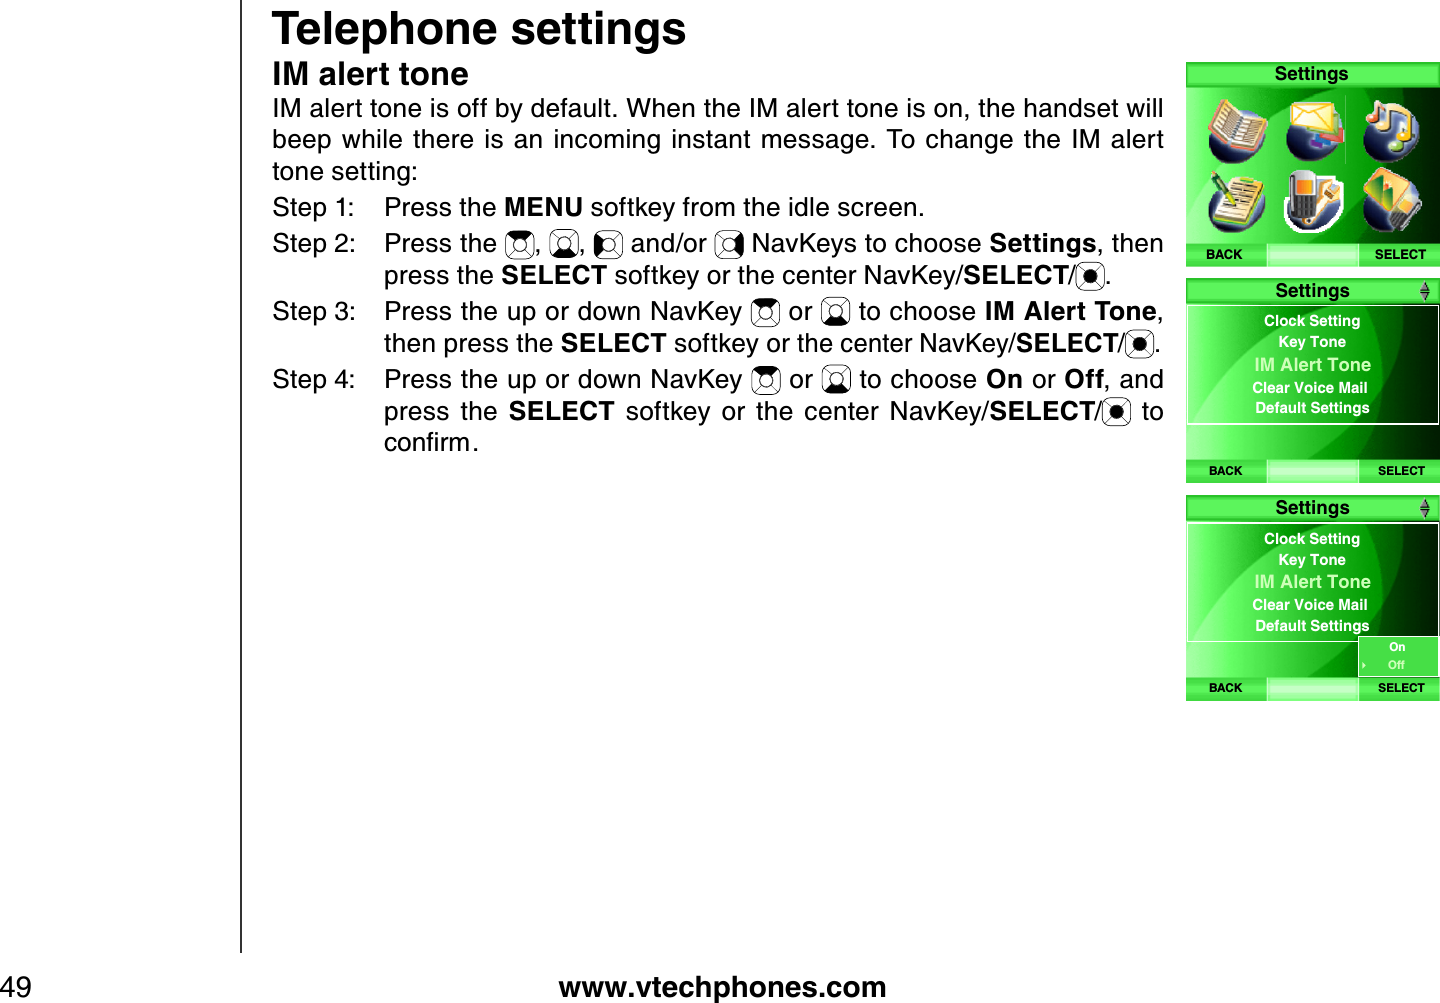 www.vtechphones.com49Telephone settingsIM alert toneIM alert tone is off by default. When the IM alert tone is on, the handset will beep  while there is  an incoming instant  message.  To  change the  IM alert tone setting:Step 1: Press the MENU softkey from the idle screen.Step 2: Press the  , ,  and/or   NavKeys to choose Settings, then press the SELECT softkey or the center NavKey/SELECT/.Step 3: Press the up or down NavKey   or   to choose IM Alert Tone,then press the SELECT softkey or the center NavKey/SELECT/ .Step 4: Press the up or down NavKey   or   to choose On or Off, and press  the  SELECT  softkey  or  the  center  NavKey/SELECT/  to EQPſTOSELECTSettingsBACKBACK SELECTClock Setting IM Alert Tone Clear Voice Mail Default SettingsKey ToneSettingsBACK SELECTClock Setting IM Alert Tone Clear Voice Mail Default SettingsKey ToneSettingsOnOff